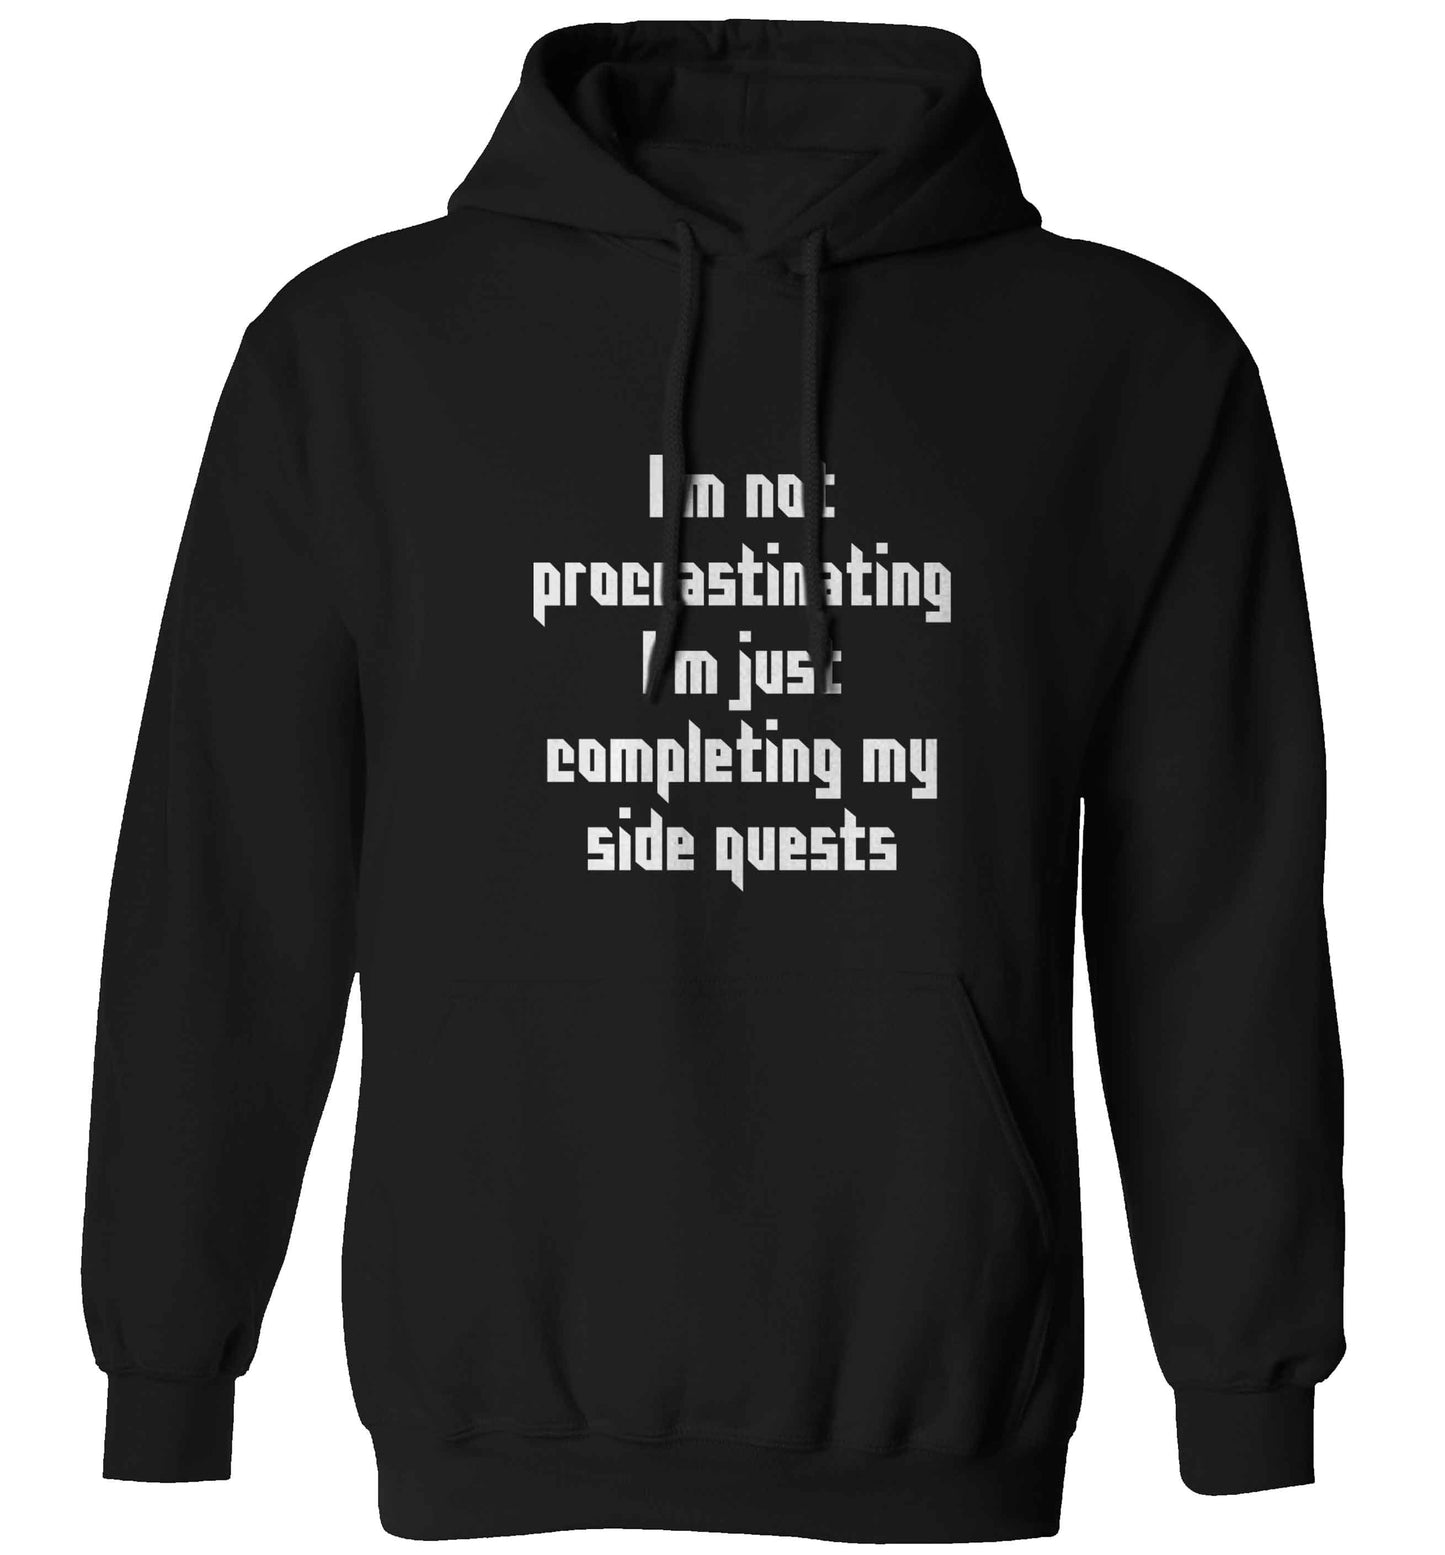 I'm not procrastinating I'm just completing my side quests adults unisex black hoodie 2XL